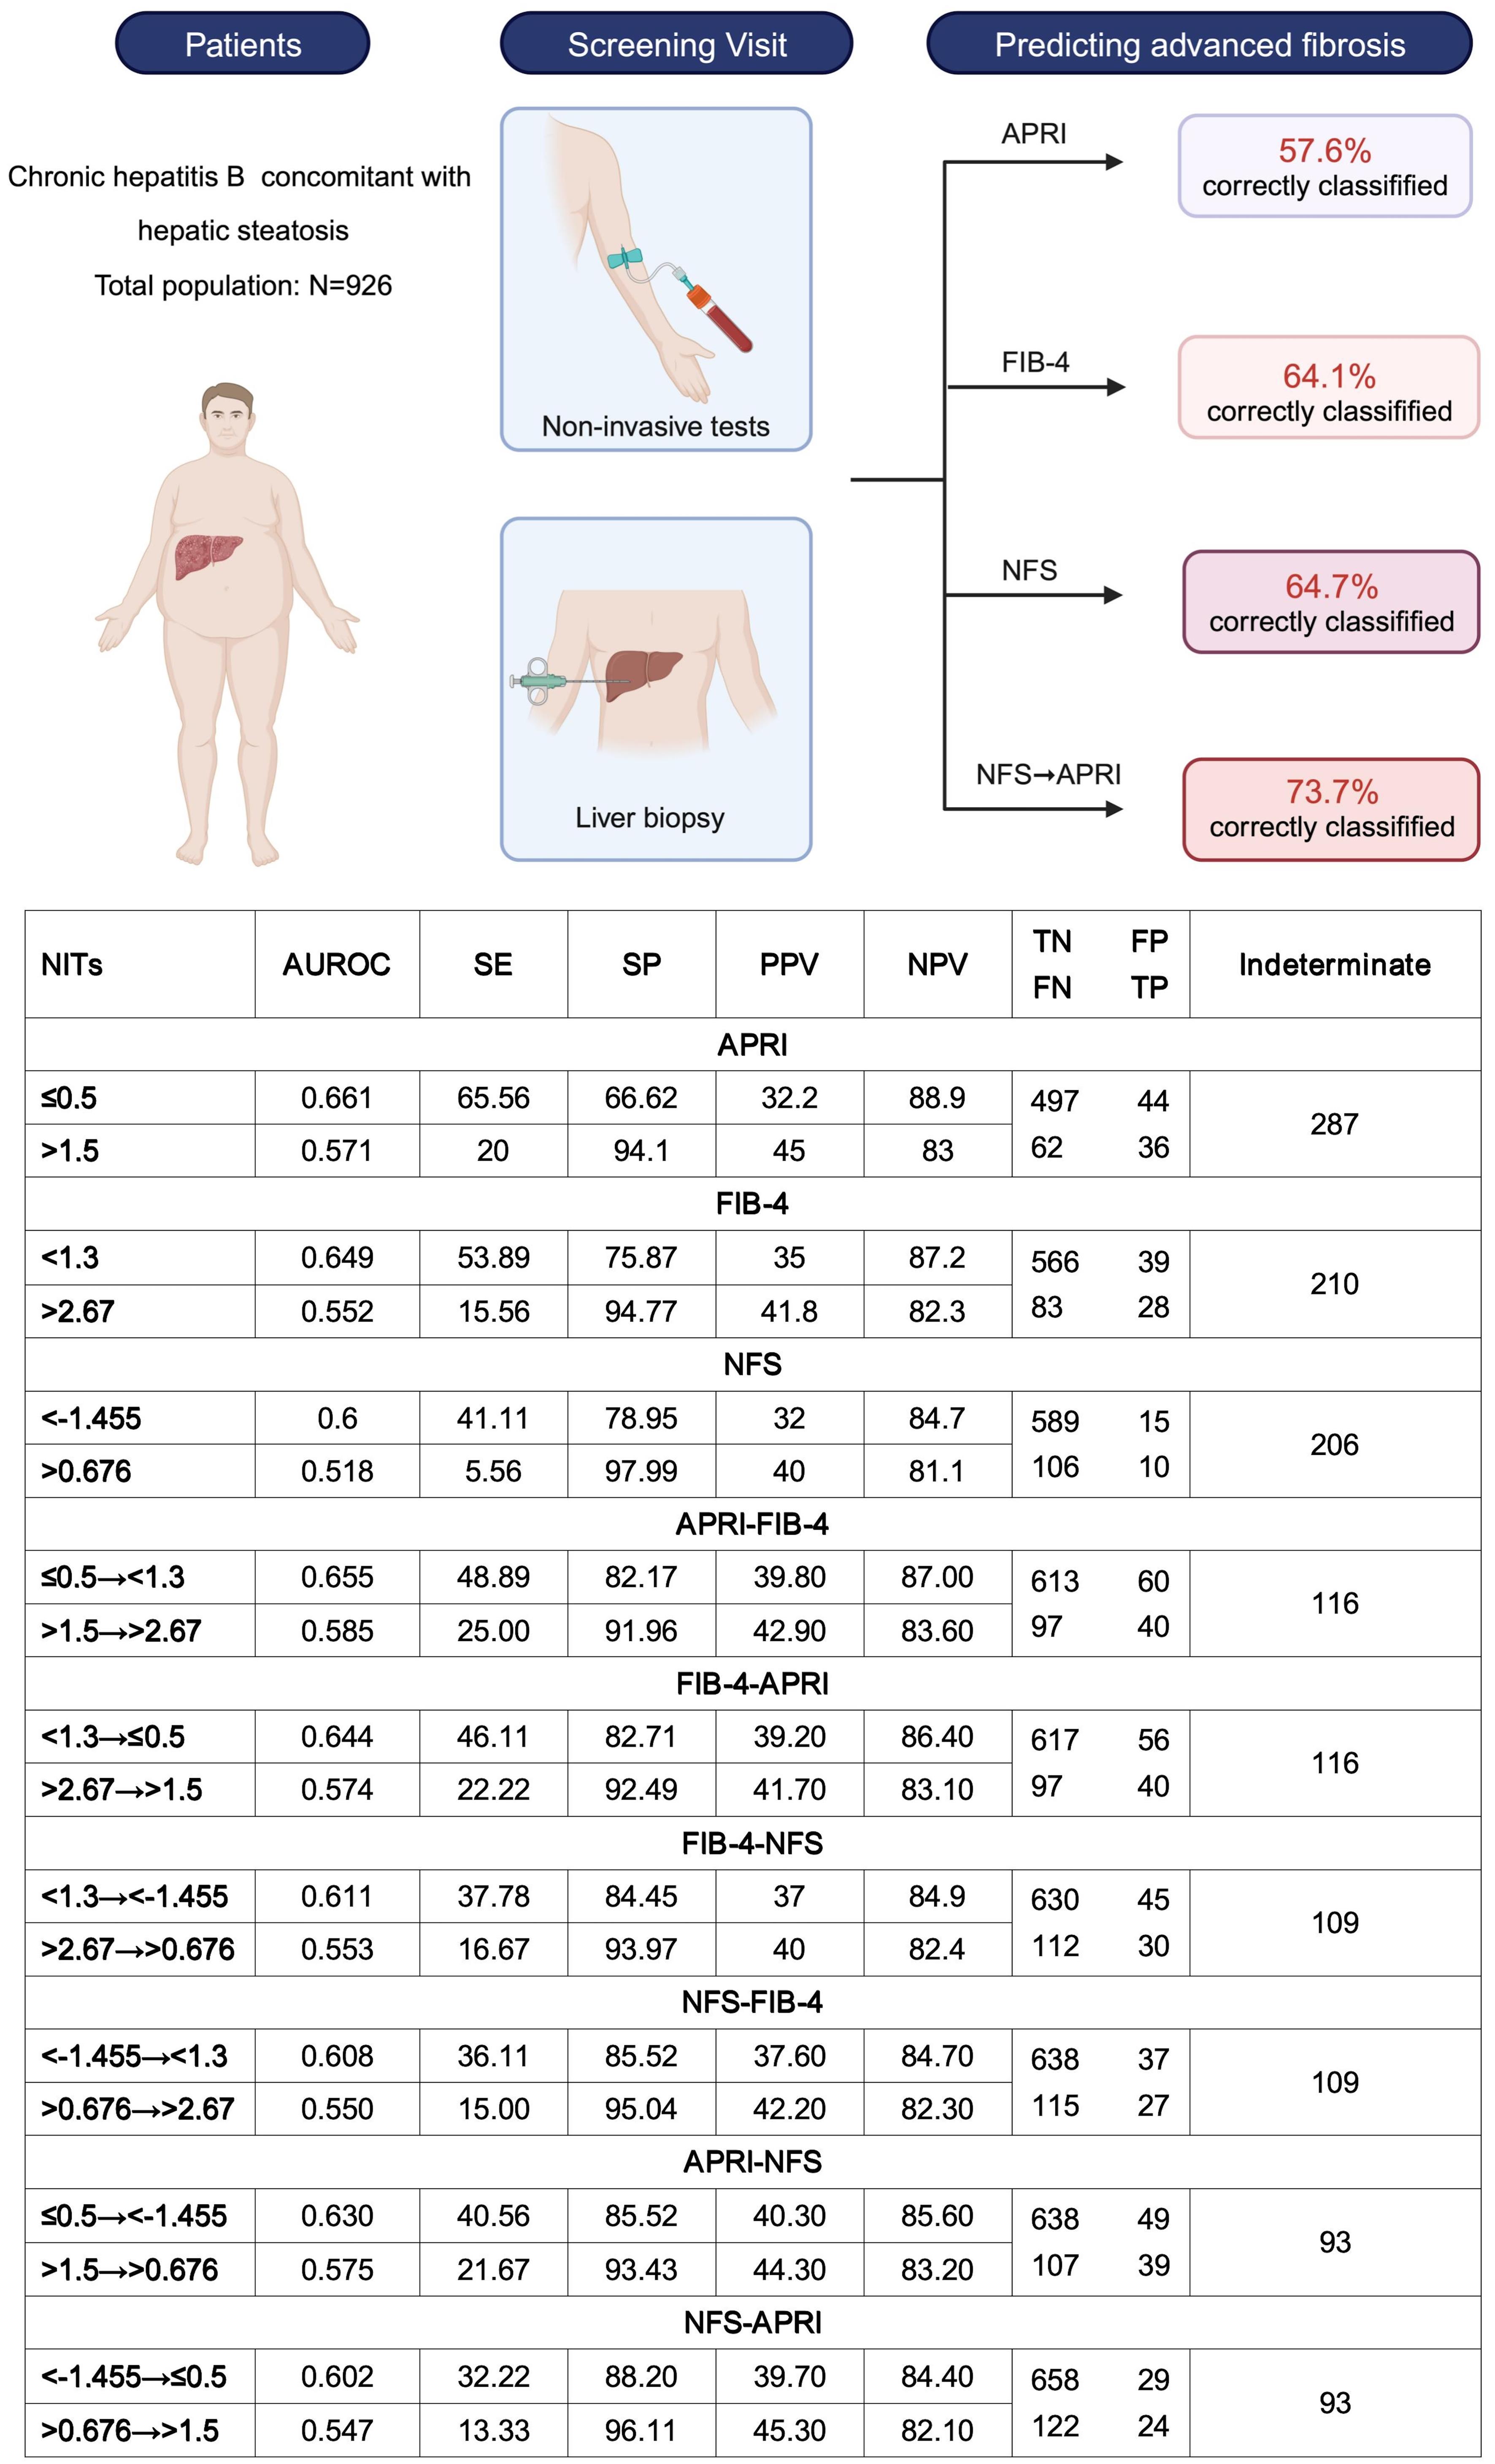 Comparison of different non-invasive tests and combined model for predicting advanced fibrosis in chronic hepatitis B patients with concurrent hepatic steatosis.